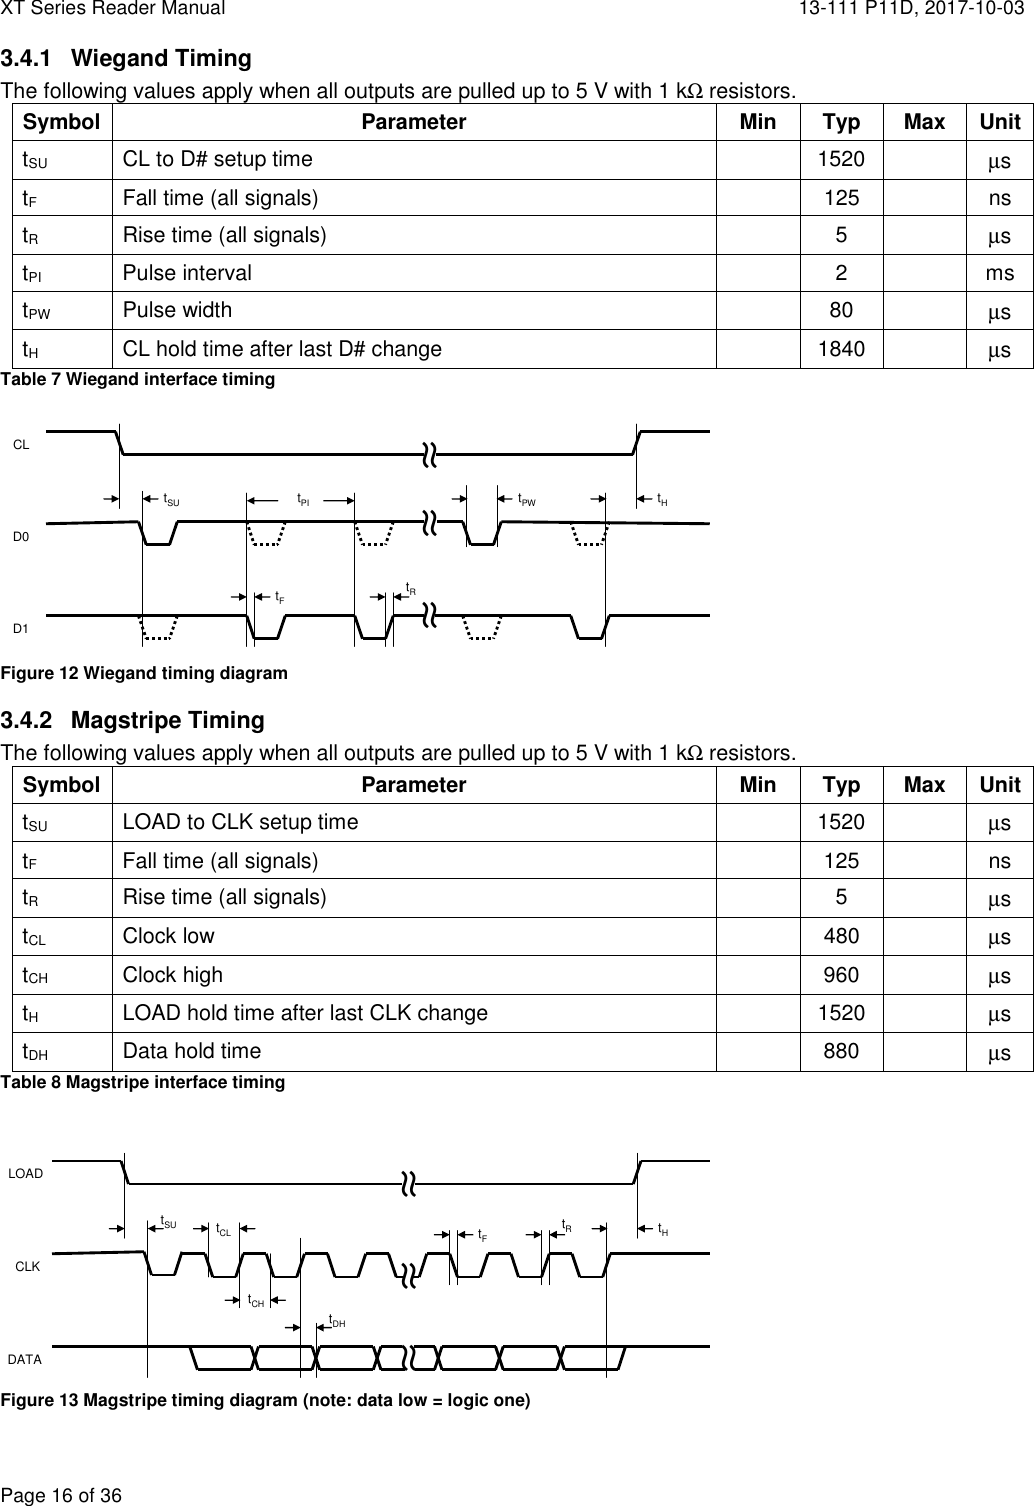 XT Series Reader Manual  13-111 P11D, 2017-10-03  Page 16 of 36 3.4.1  Wiegand Timing The following values apply when all outputs are pulled up to 5 V with 1 kΩ resistors. Symbol Parameter  Min  Typ  Max  Unit tSU  CL to D# setup time    1520   µs tF  Fall time (all signals)    125    ns tR  Rise time (all signals)    5   µs tPI Pulse interval  2  ms tPW  Pulse width    80   µs tH  CL hold time after last D# change    1840   µs Table 7 Wiegand interface timing tSUtPItPWtHtRtFCLD0D1≈ ≈ ≈ Figure 12 Wiegand timing diagram 3.4.2  Magstripe Timing The following values apply when all outputs are pulled up to 5 V with 1 kΩ resistors. Symbol Parameter  Min  Typ  Max  Unit tSU  LOAD to CLK setup time    1520   µs tF Fall time (all signals)  125  ns tR  Rise time (all signals)    5   µs tCL  Clock low    480   µs tCH  Clock high    960   µs tH  LOAD hold time after last CLK change    1520   µs tDH  Data hold time    880   µs Table 8 Magstripe interface timing  ≈≈tSULOADCLKDATA≈tCLtCHtDHtHtRtF Figure 13 Magstripe timing diagram (note: data low = logic one) 